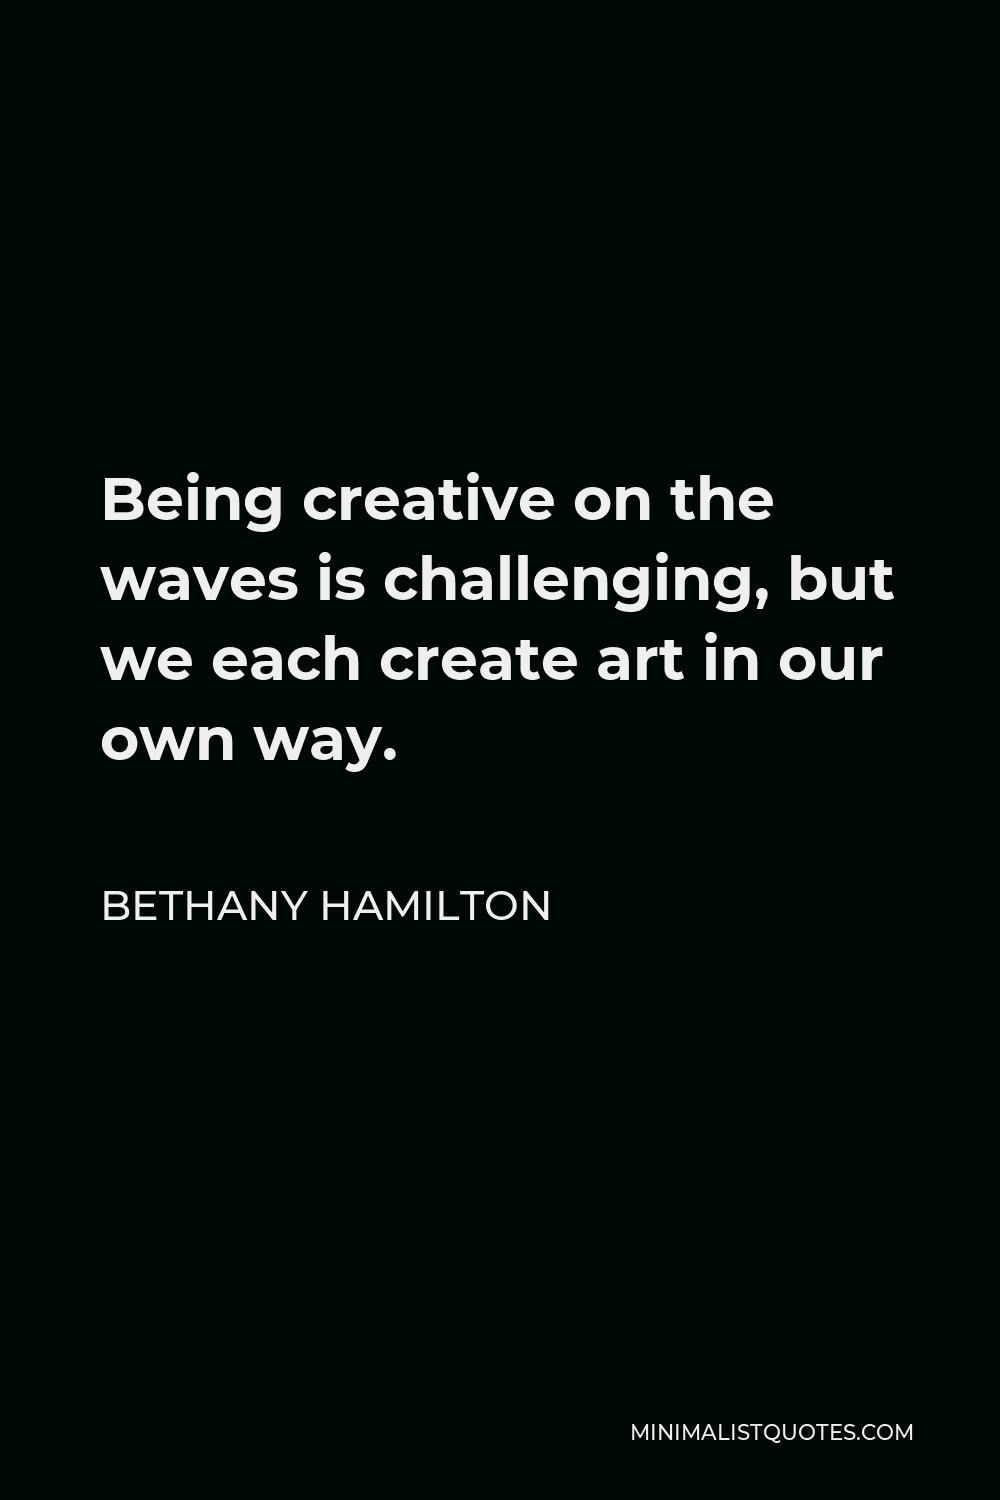 Bethany Hamilton Quote - Being creative on the waves is challenging, but we each create art in our own way.